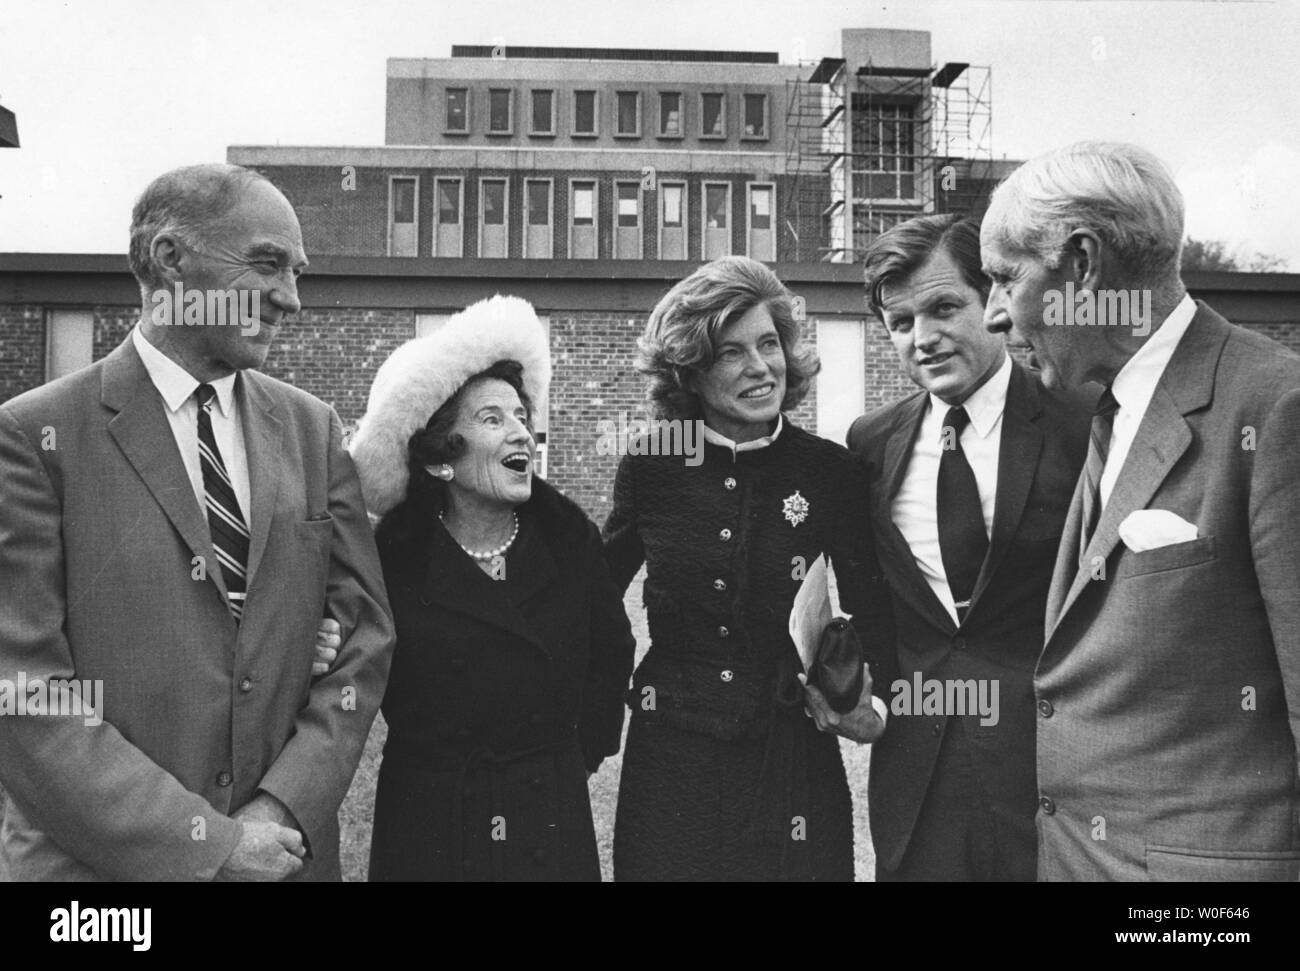 Eunice Kennedy Shriver, founder and chairperson of the Special Olympics, died at at a Cape Cod hospital in Hyannis, Massachusetts on August 11, 2009.  She was 88 and the sister of President John F. Kennedy, Senator Ted Kennedy, and mother of Maria Shriver, the first lady of California.   She is shown in Waltham, MA, on October 14, 1970 for the dedication of the Eunice Kennedy Shriver Institute, a $2.6 million center for research and clinical evaluation of the mentally retarded. L-R: Dr. Raymond D. Adams director of the Center; Mrs. Rose Kennedy; Mrs. Eunice Kennedy Shriver; Sen. Edward M. Kenn Stock Photo